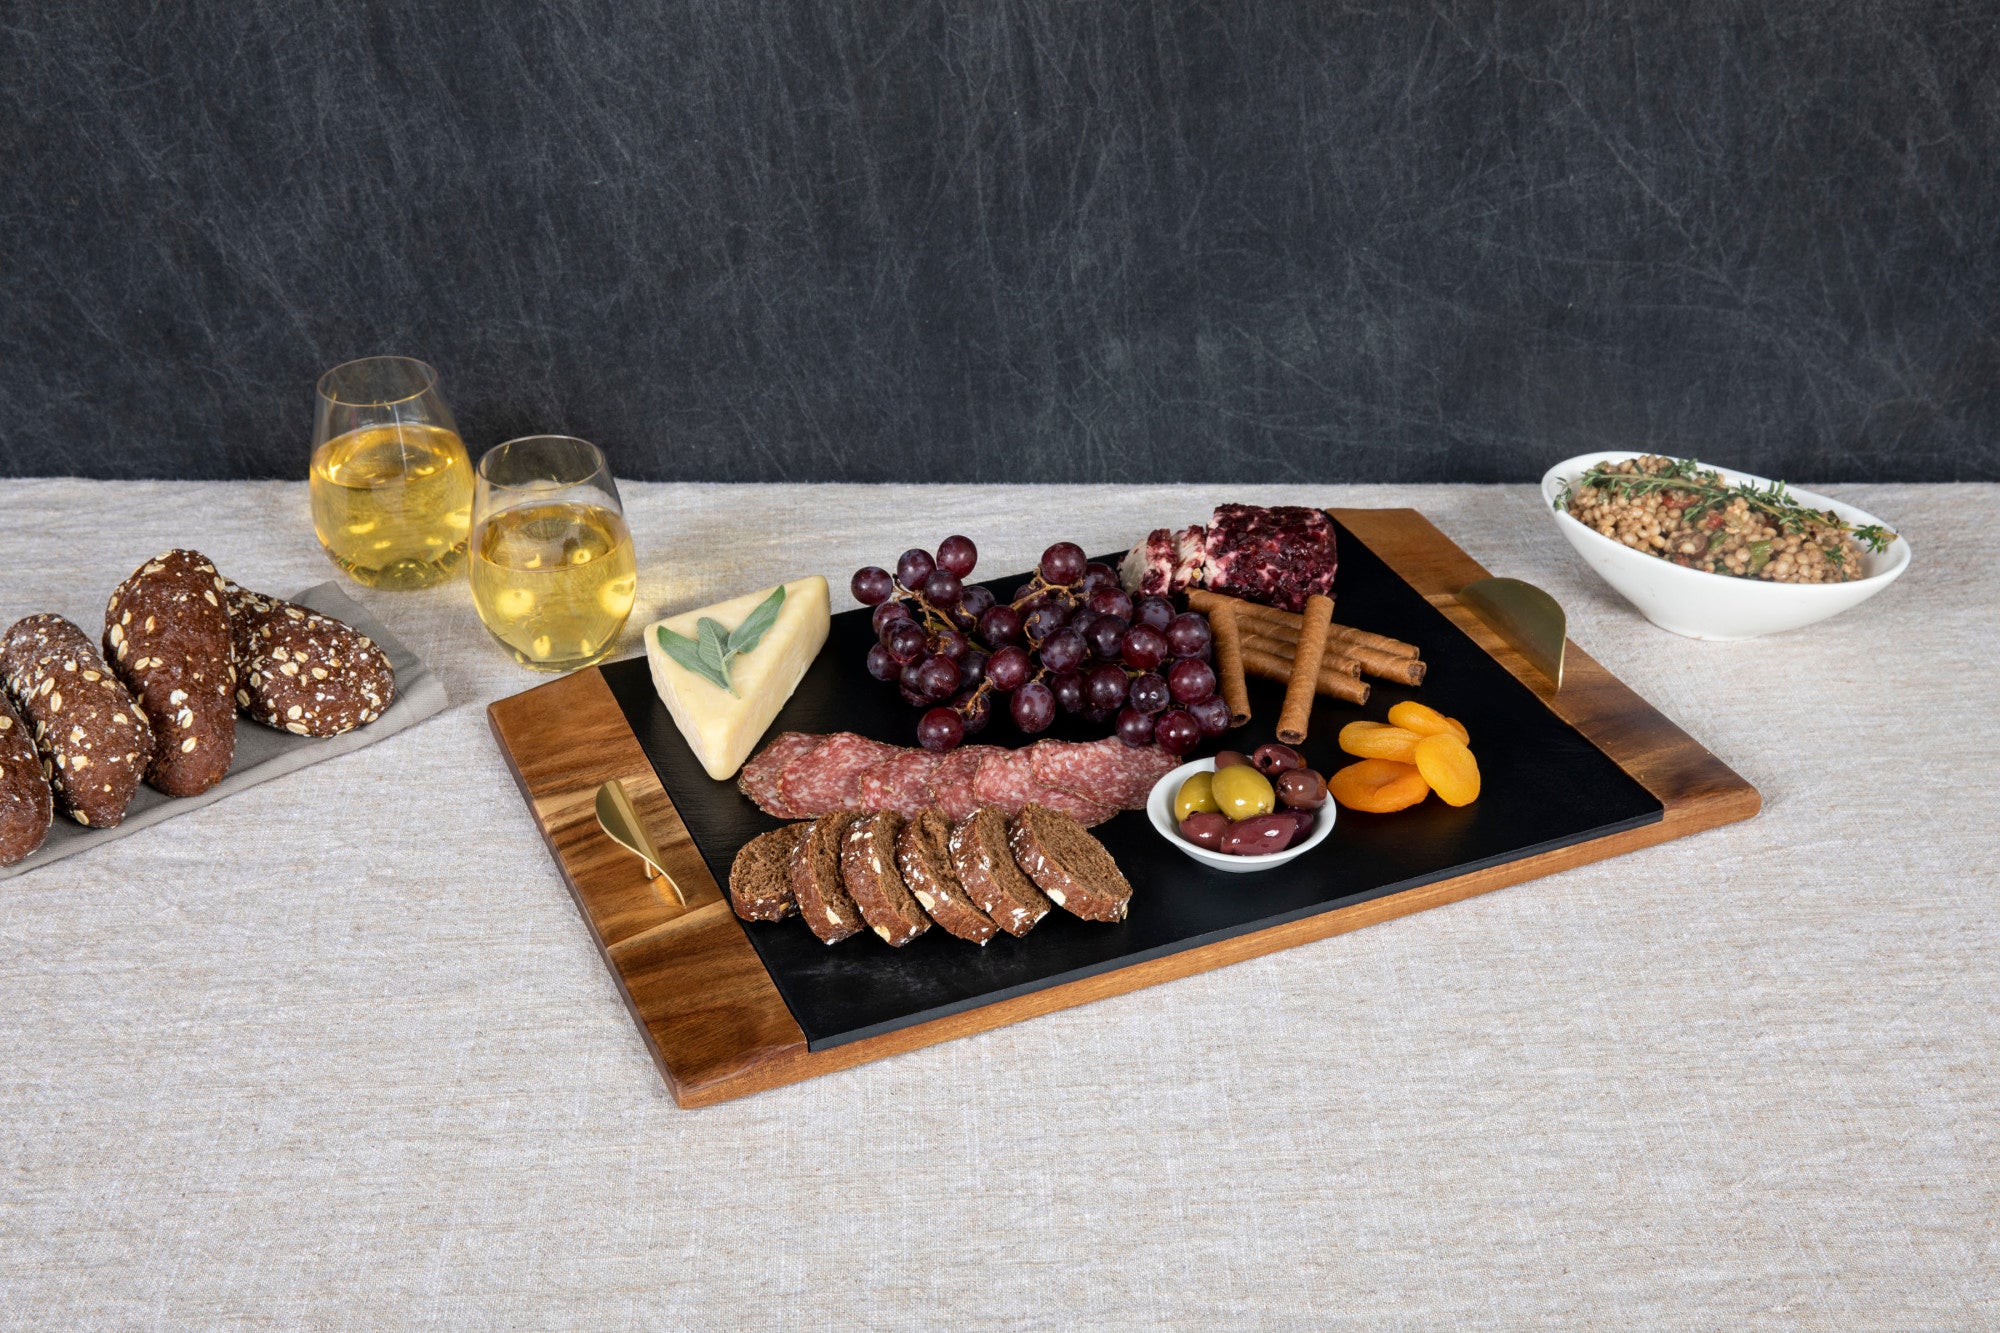 Pittsburgh Steelers - Covina Acacia and Slate Serving Tray